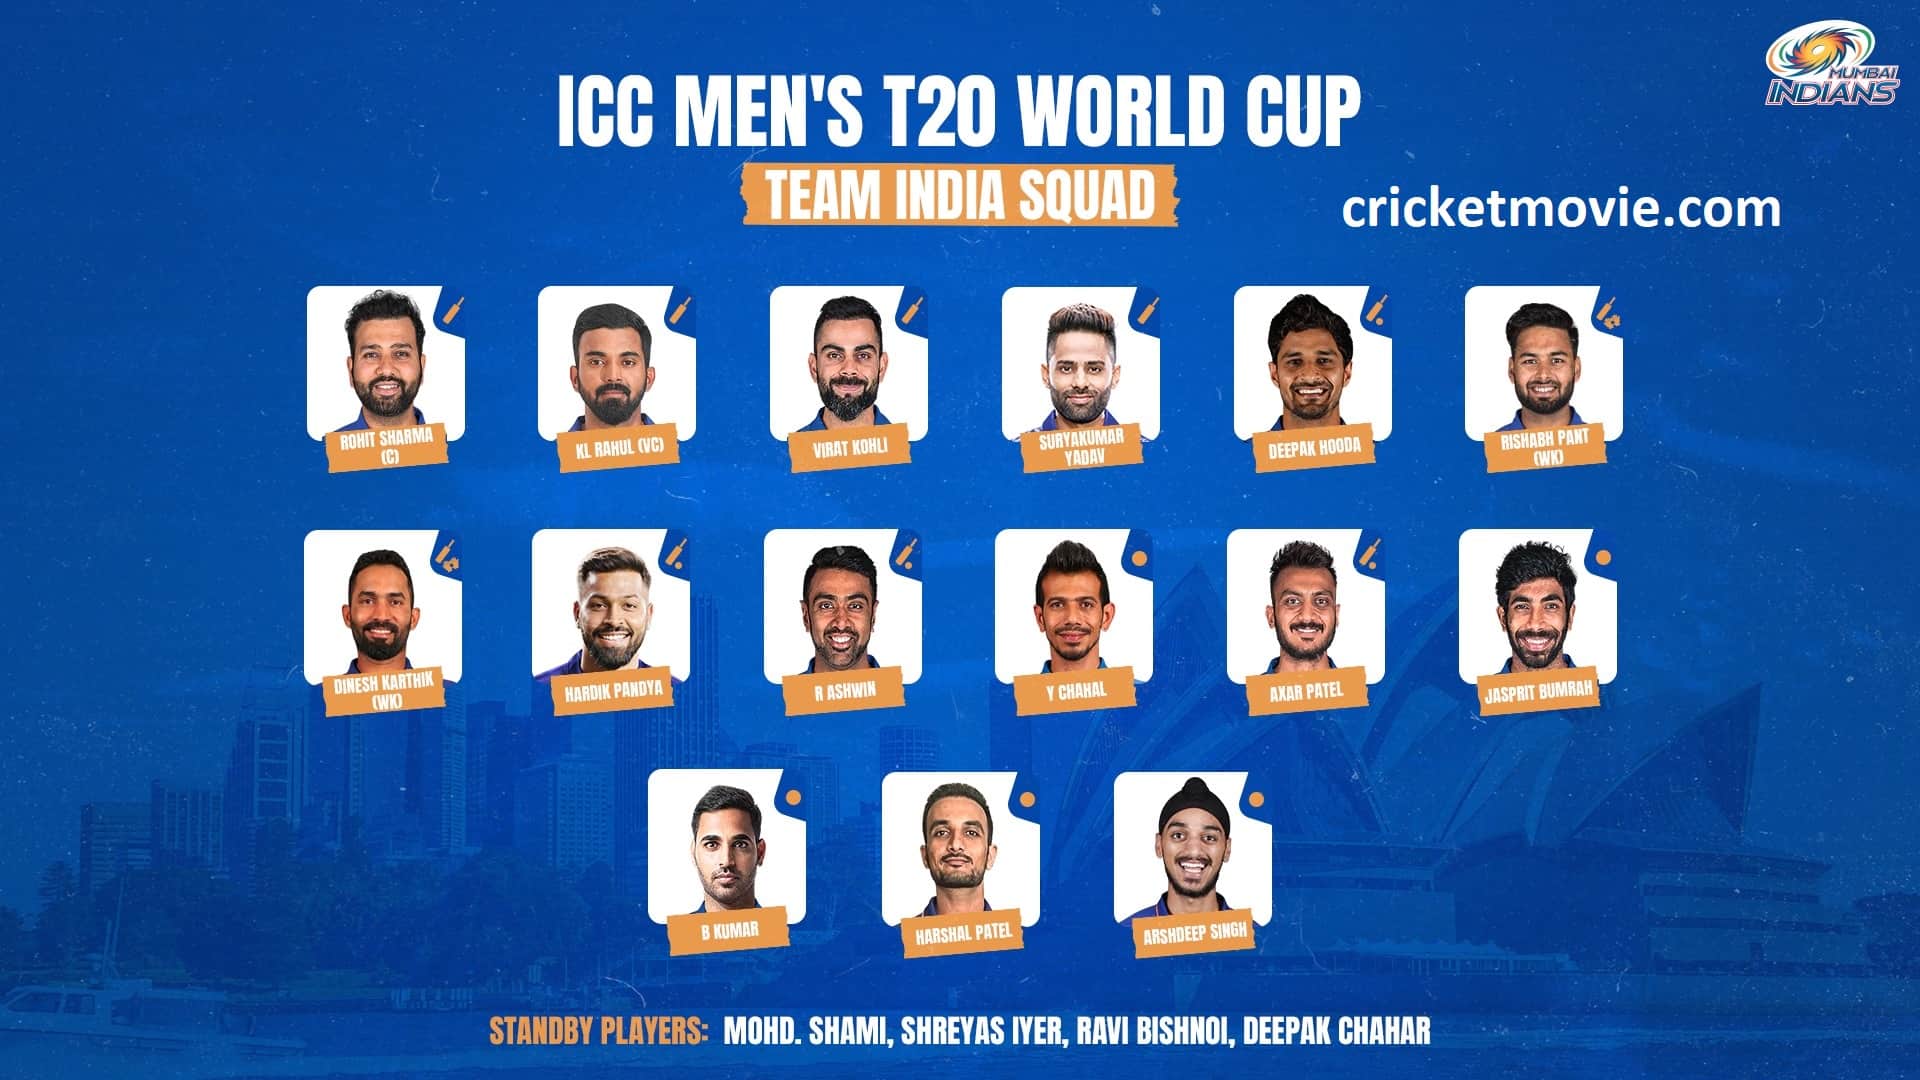 Bcci Announced Team India Squad For Upcoming Home Series And T20 World 4089